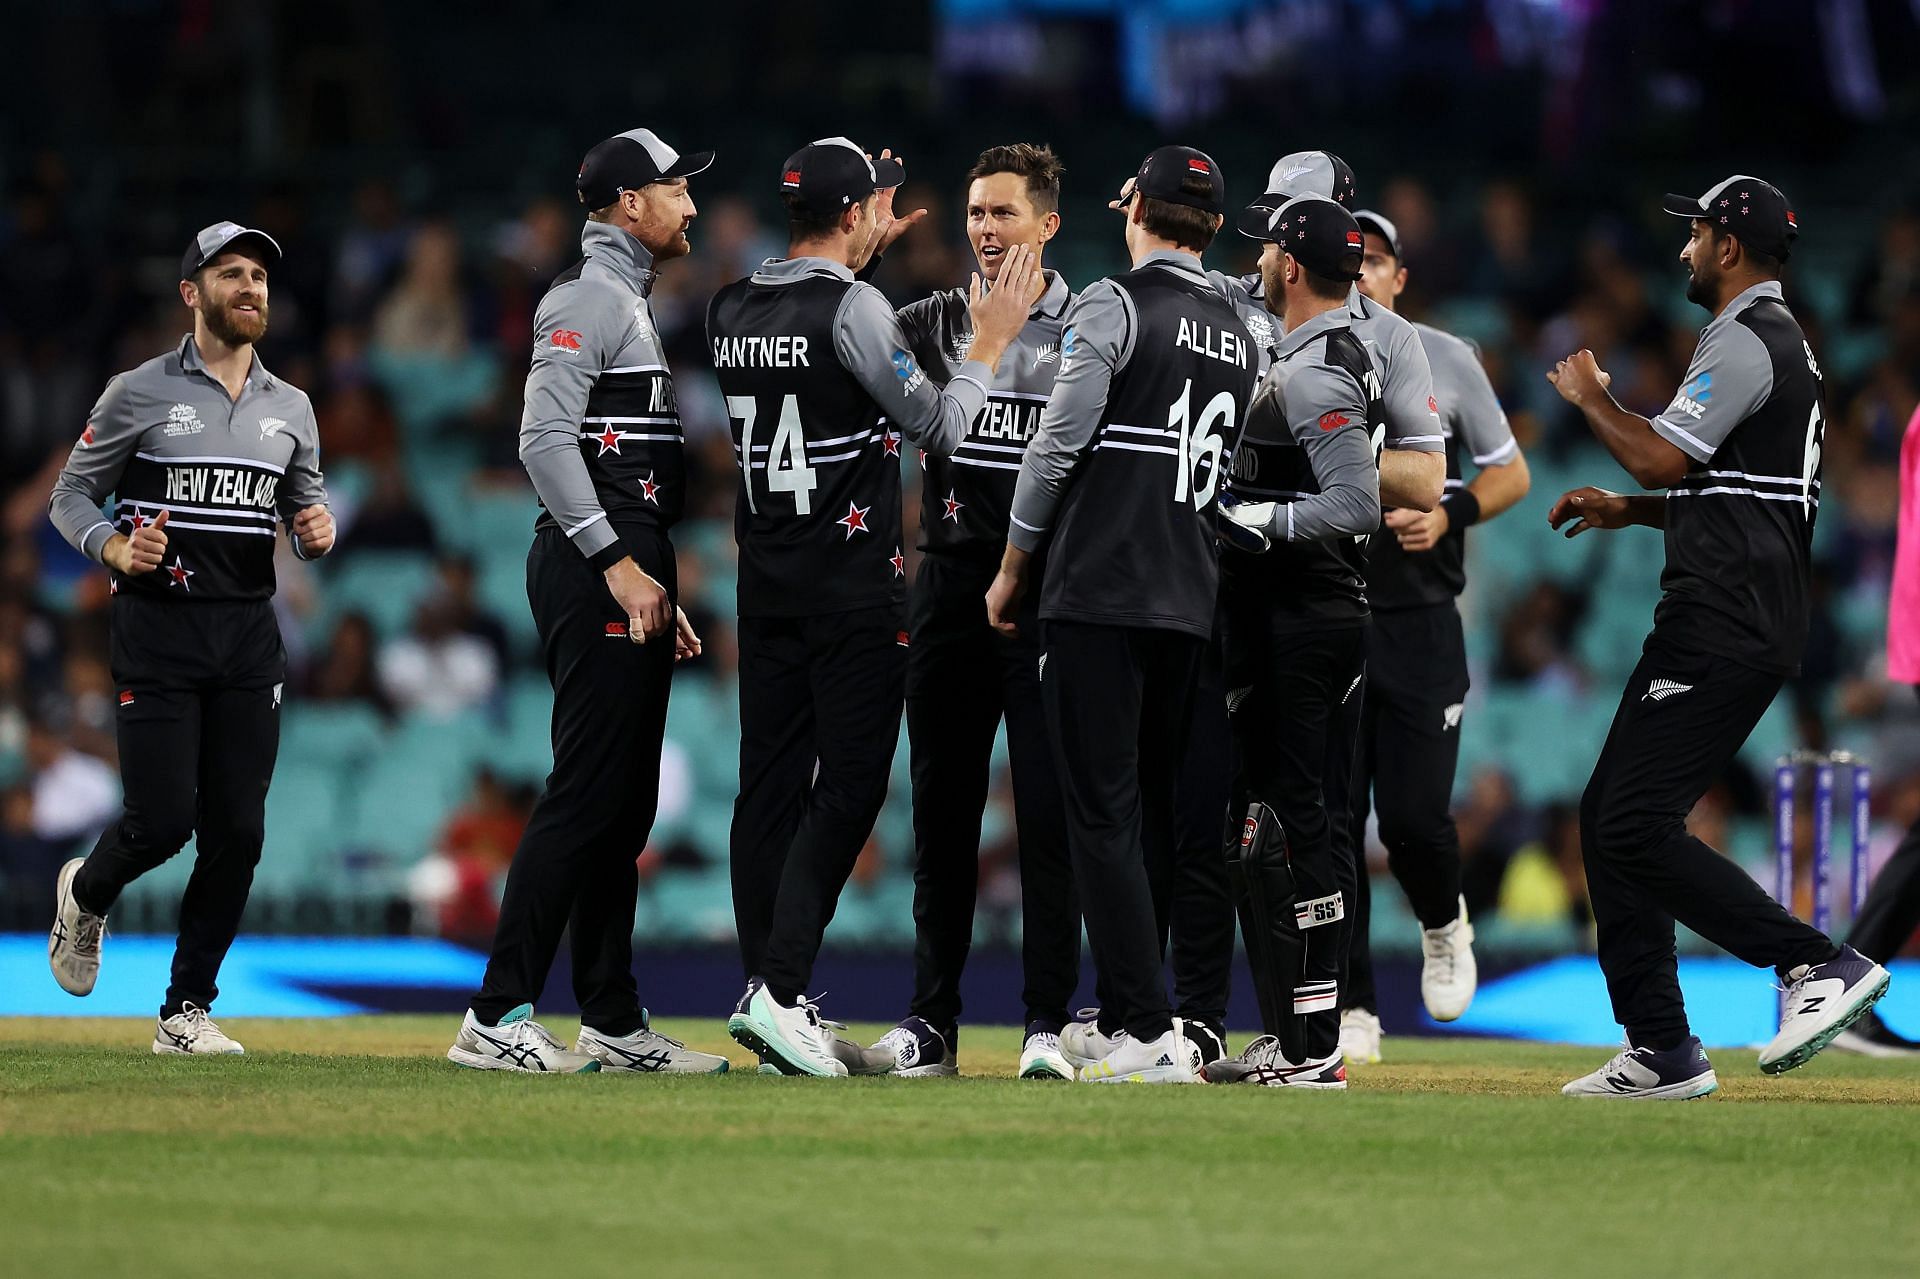 New Zealand defeated Sri Lanka by 65 runs in the last T20I at the SCG (Image: Getty)